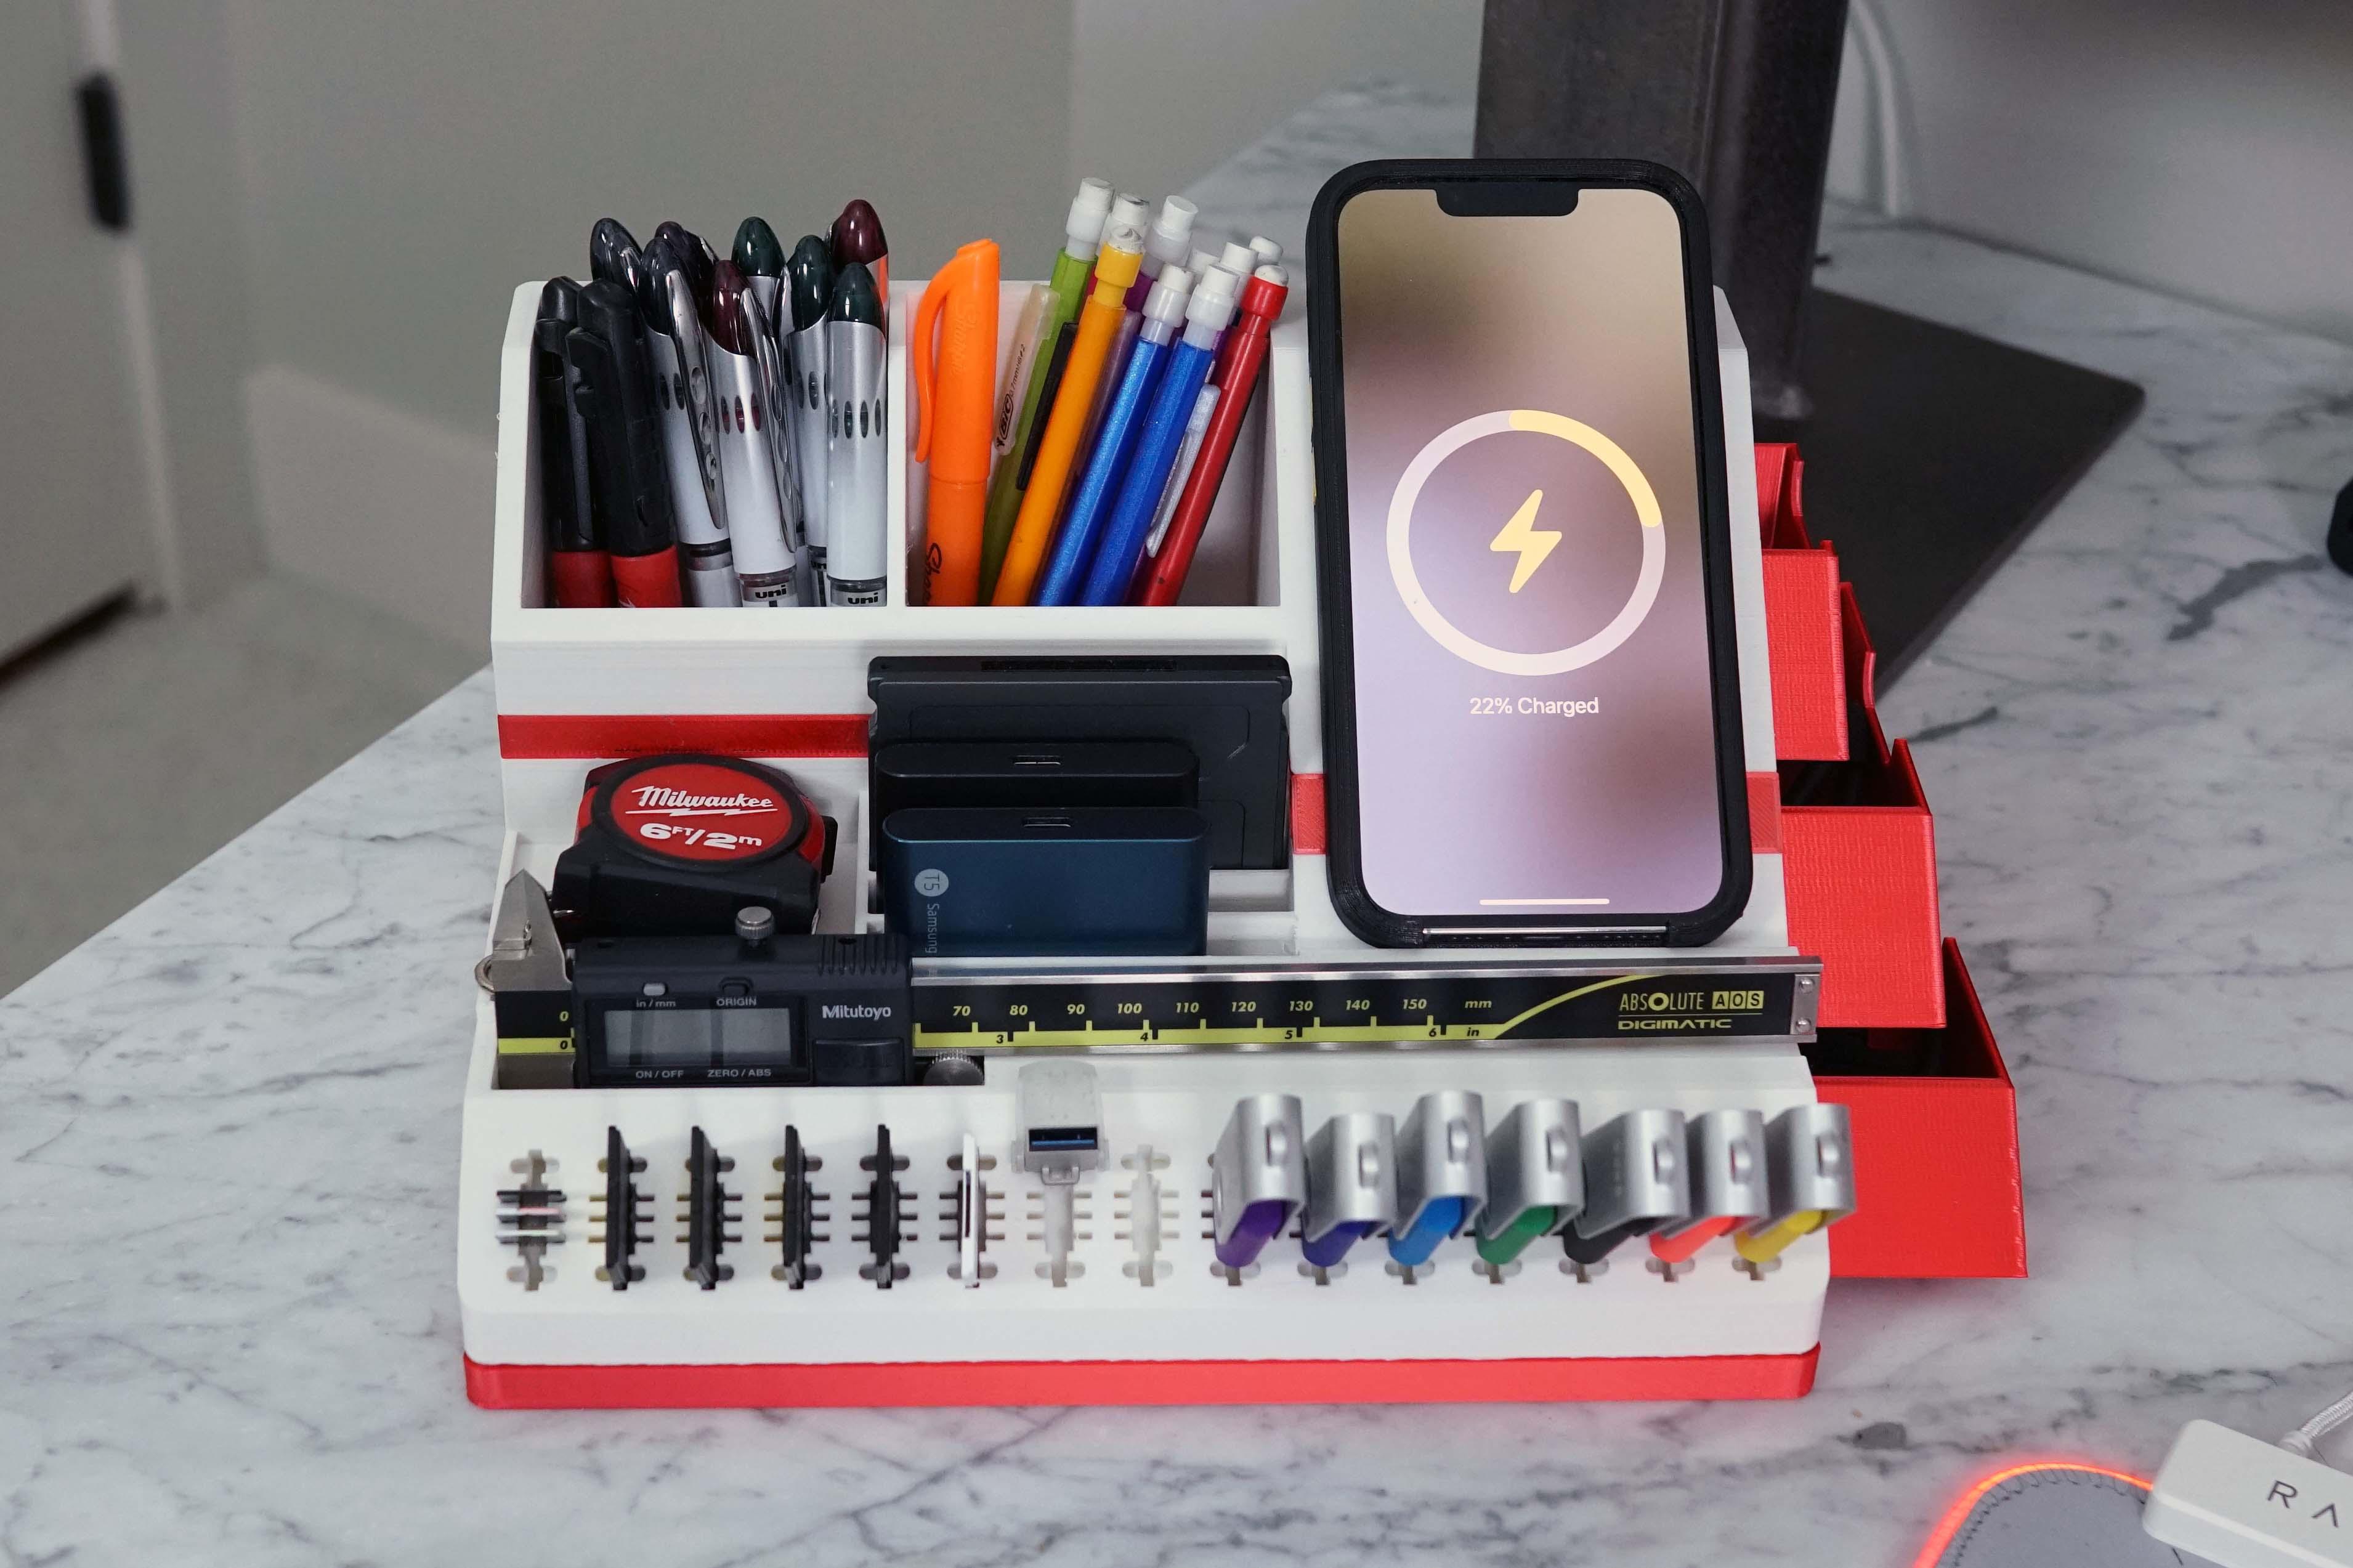 Engineer's Desk Organizer - Desk Organizer in use! This is the accent version with the Mag Safe charger for iPhone. - 3d model